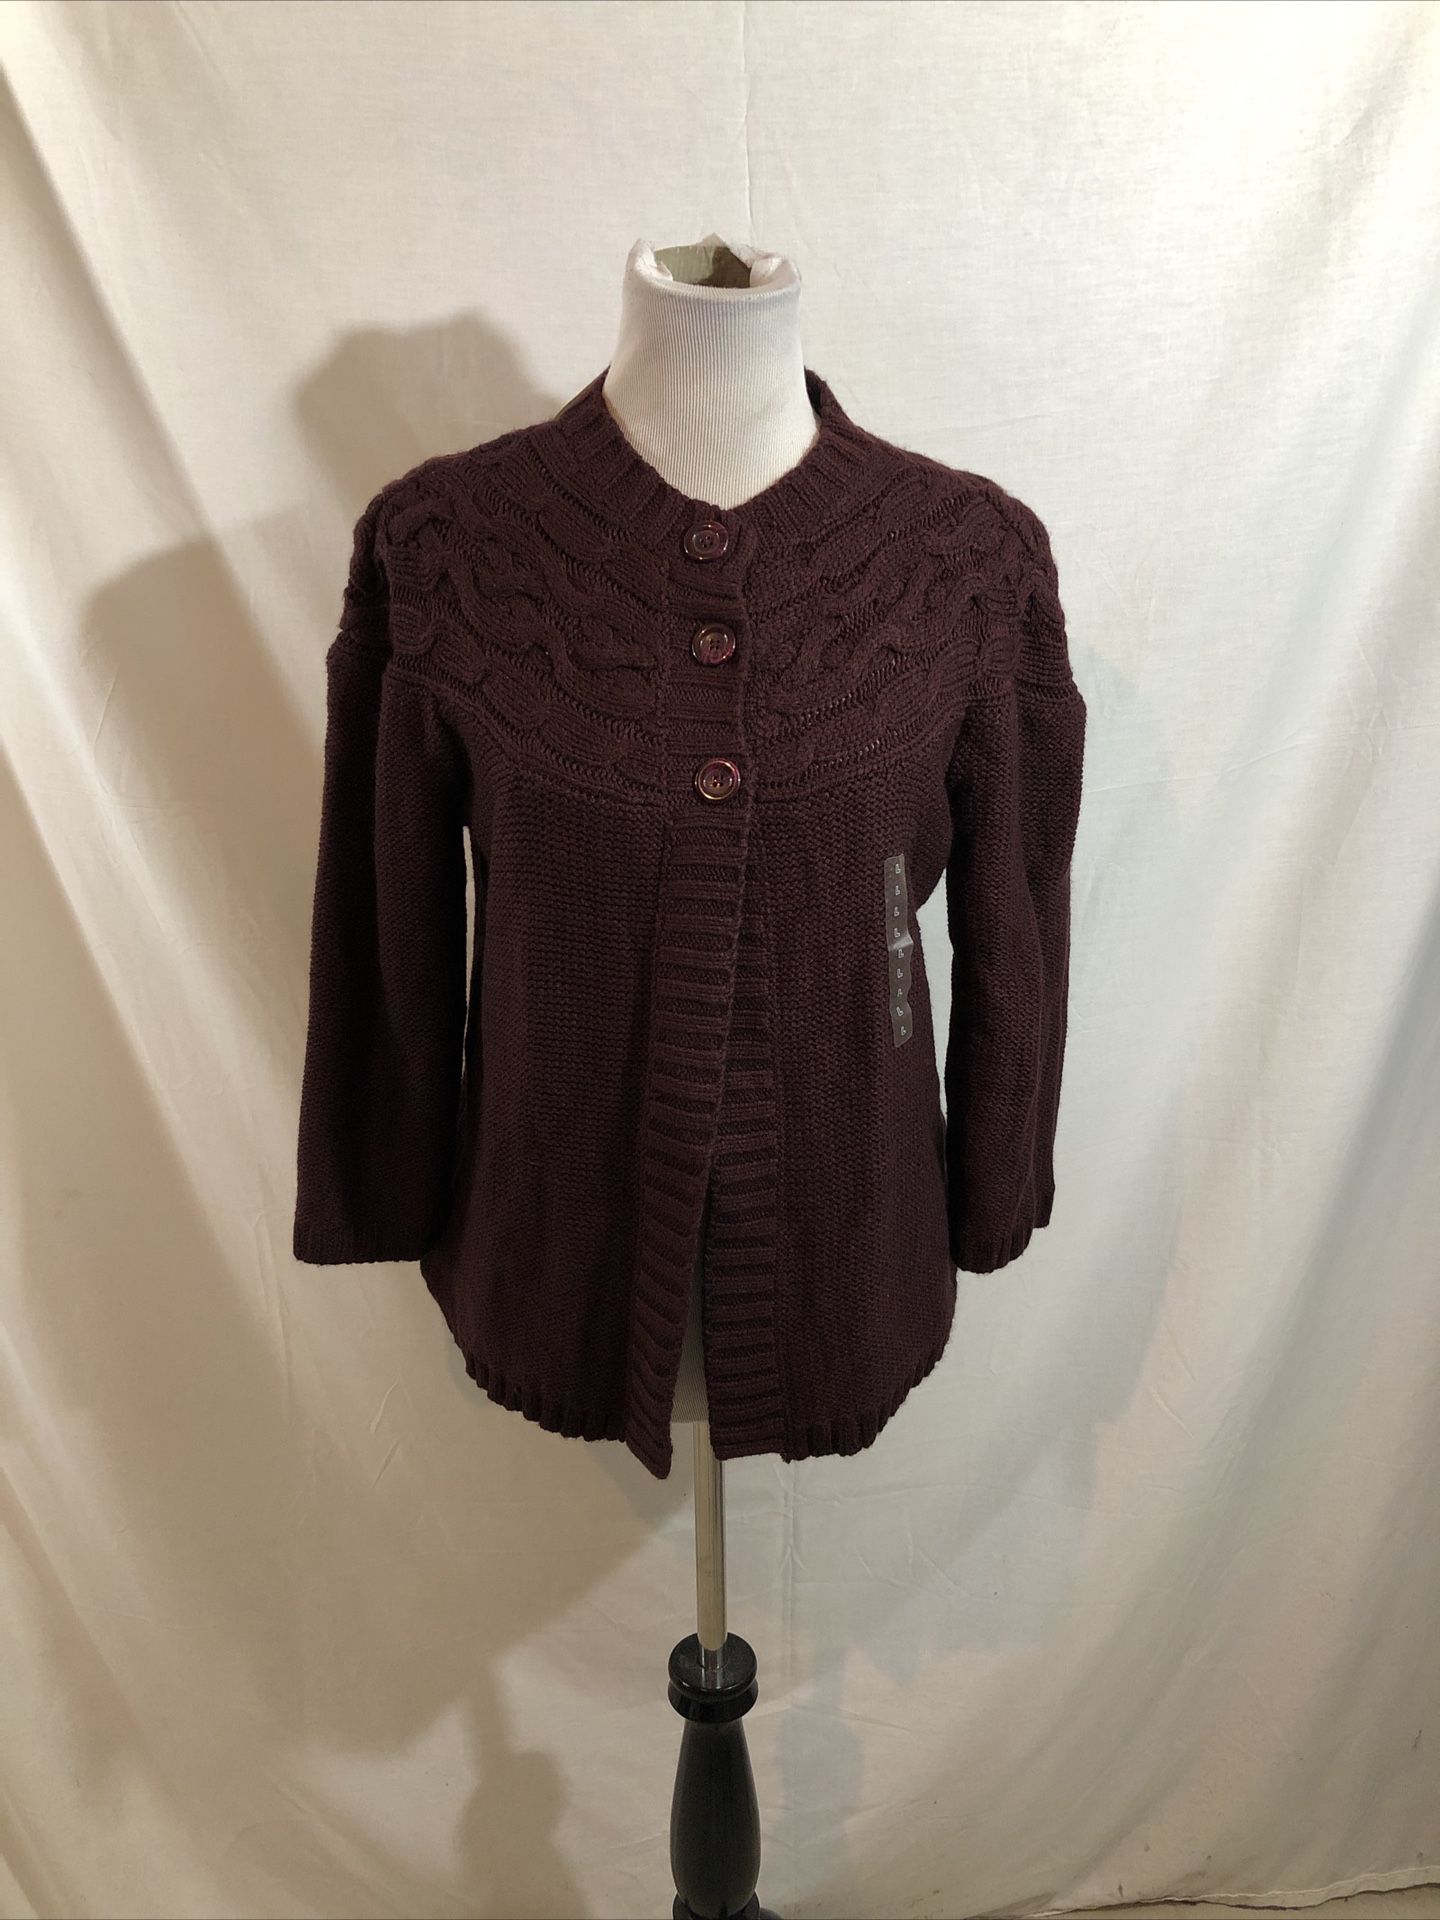 St. John’s Bay “Night Burgundy” Button Up Cable Knit Cardigan - Womens L, NWT, bust 20.5”, length 23”